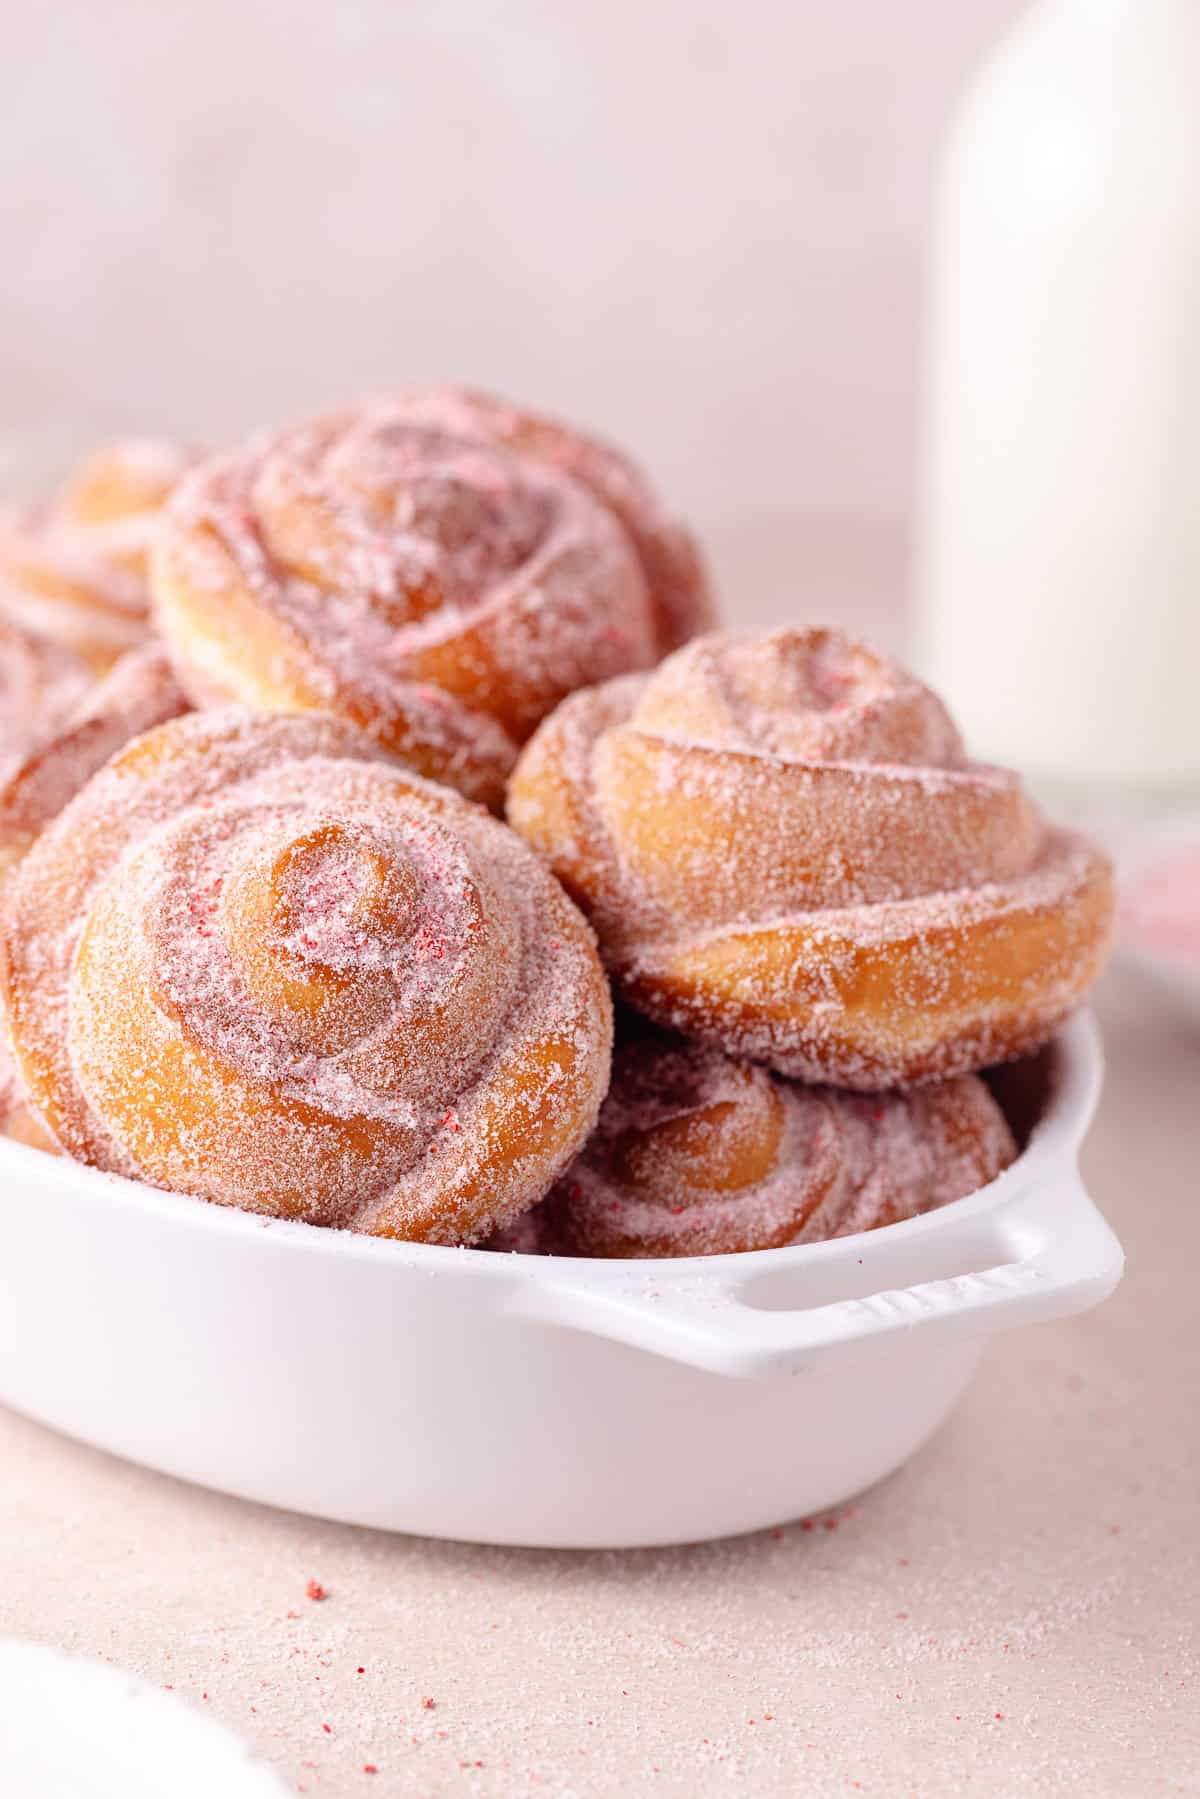 A pile of rose donuts in a baking tray.